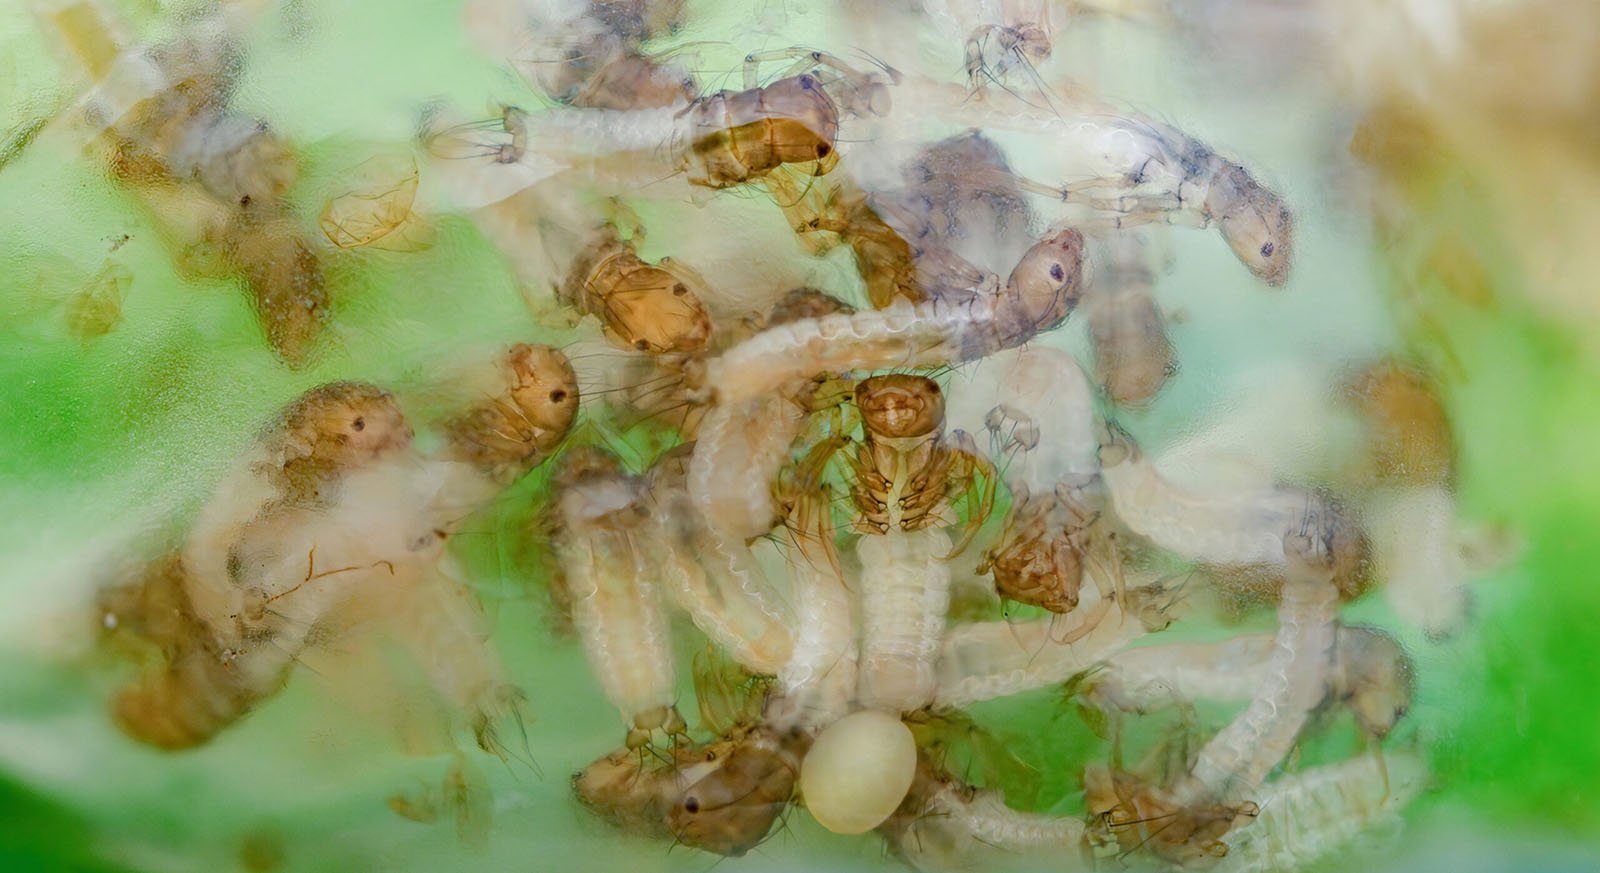 This image shows recently hatched caddisfly larvae inside a transparent gelatinous egg sac. 